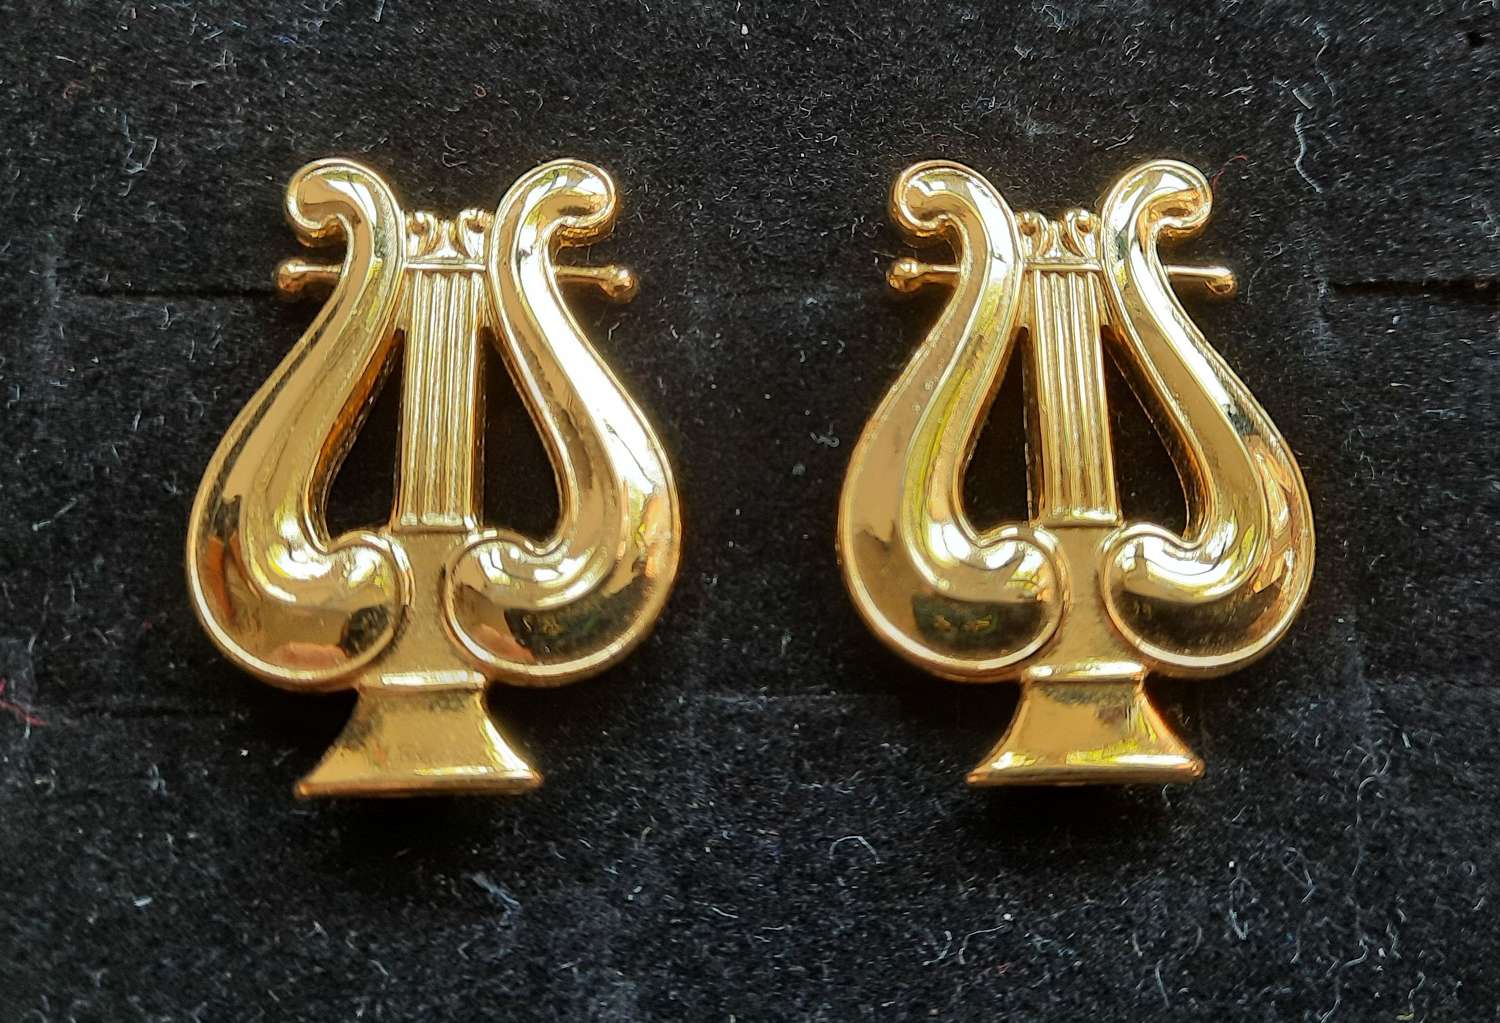 US Army Musician Officer Collar Devices